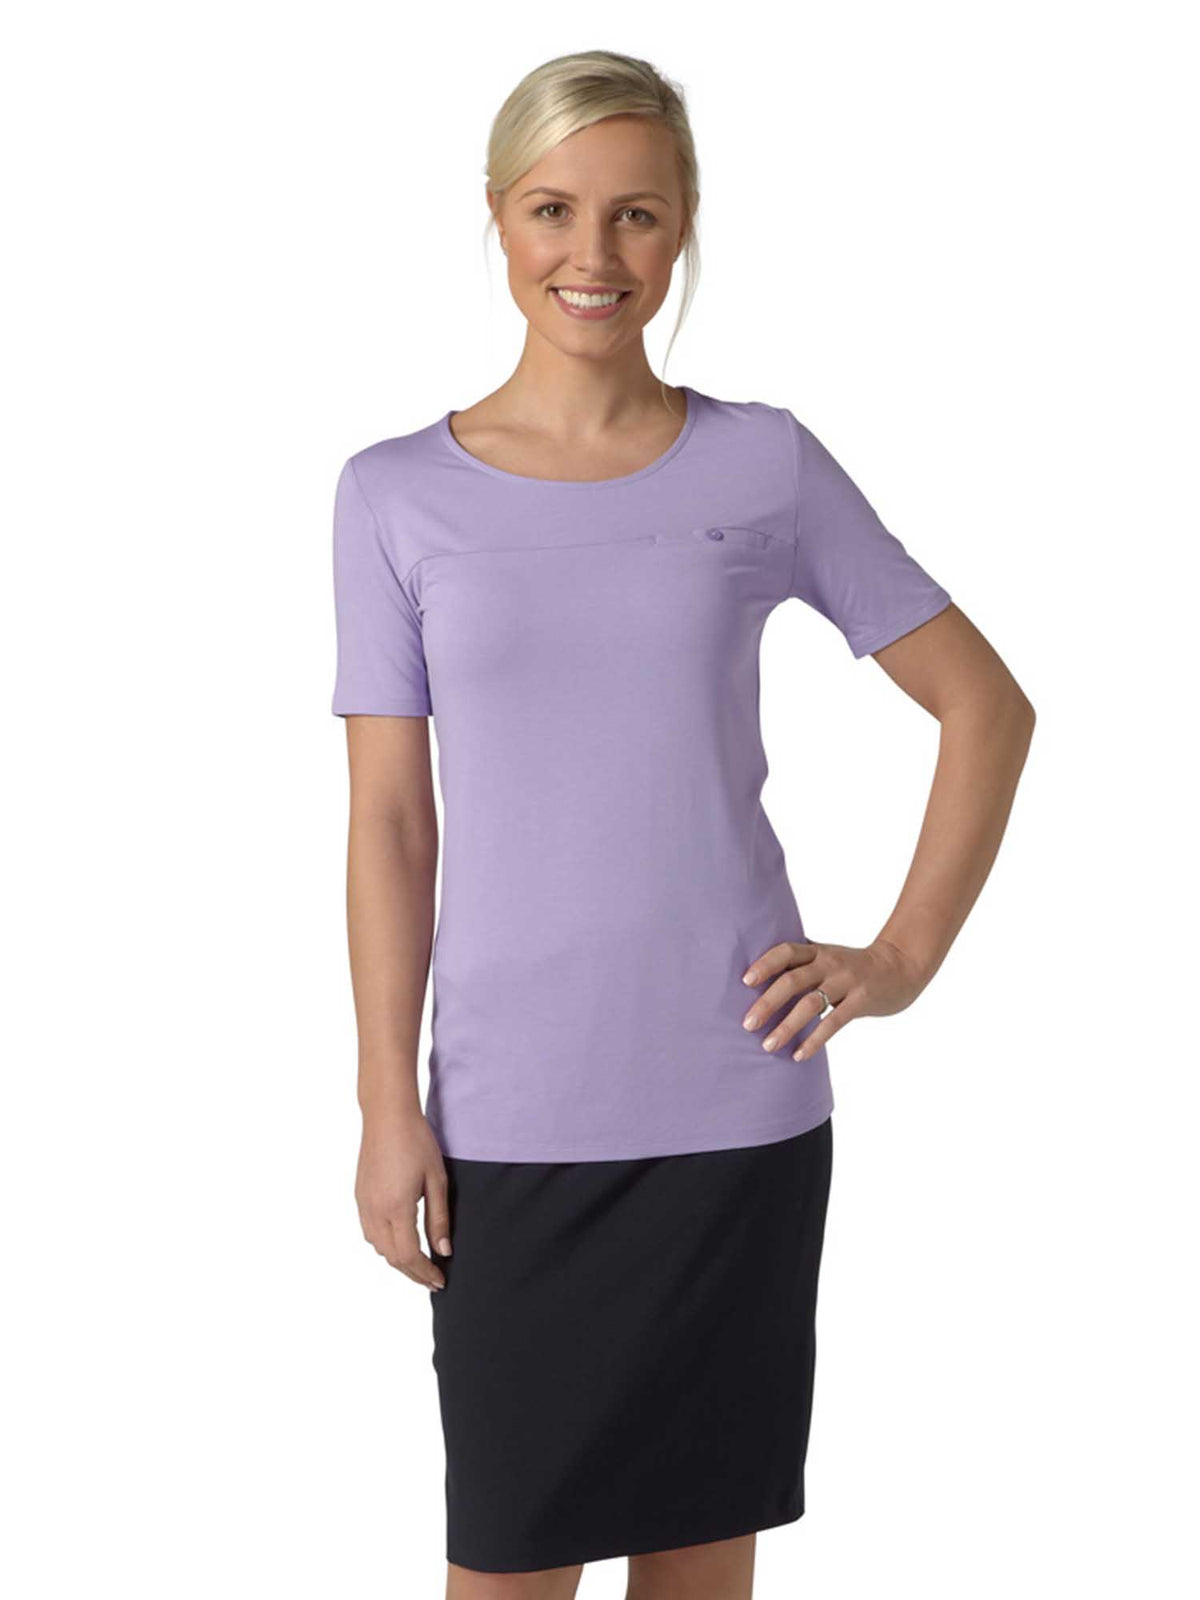 DAISY LILAC STRETCH UNDERSUIT TOP SHORT SLEEVE